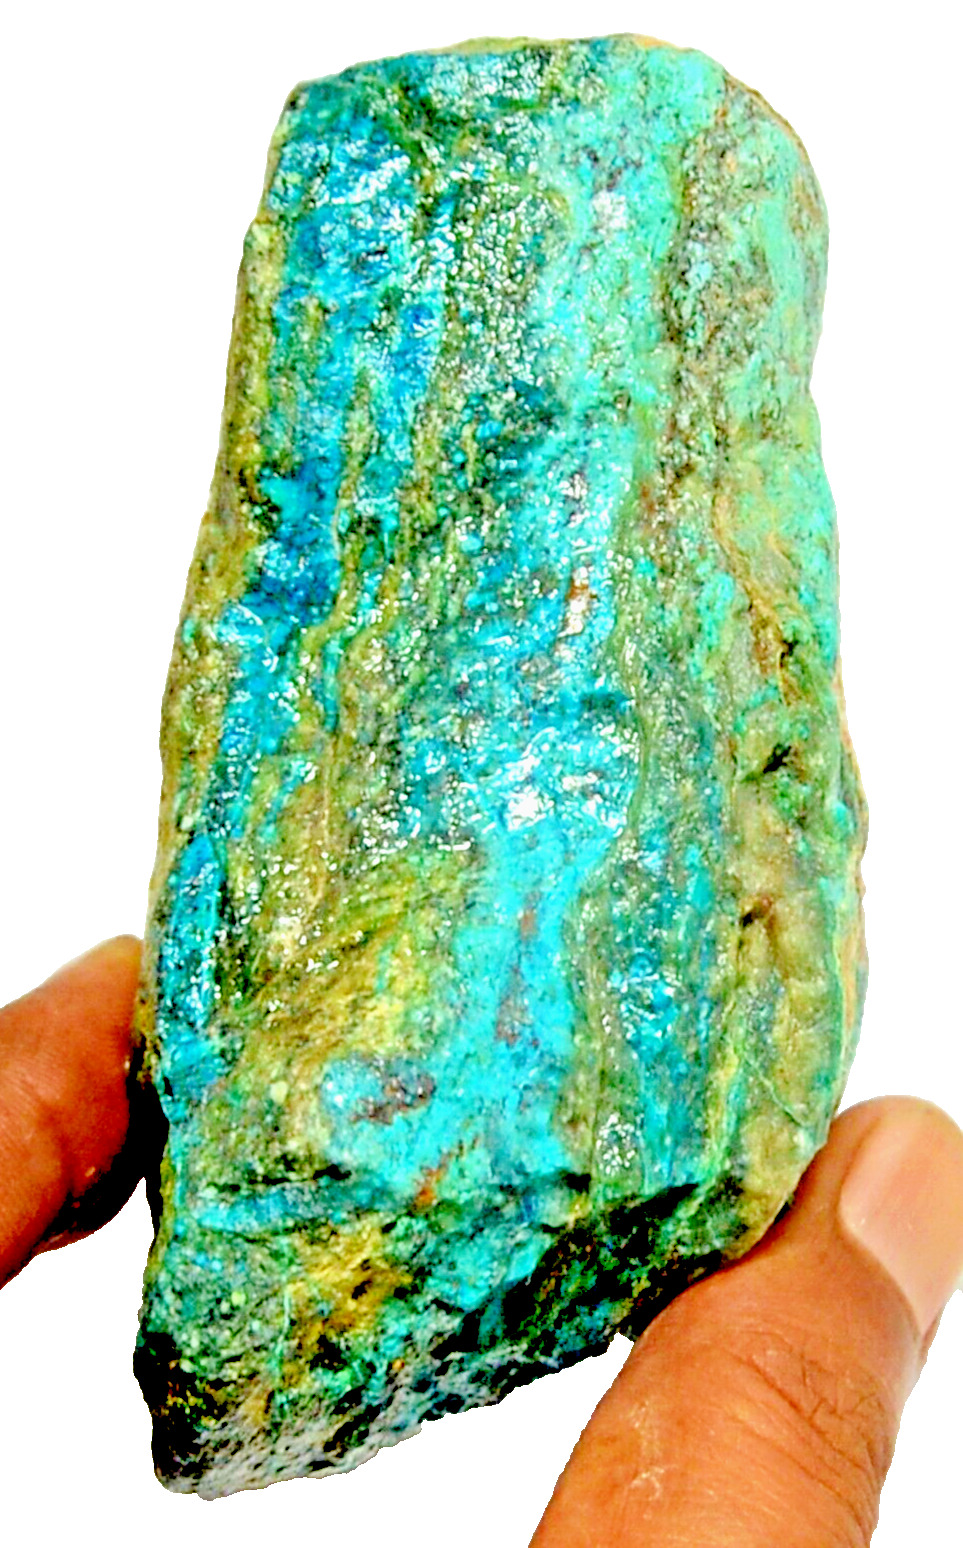 2400.00Ct 100%Natural Chrysocolla facet Rough Crystals Mineral Specimens